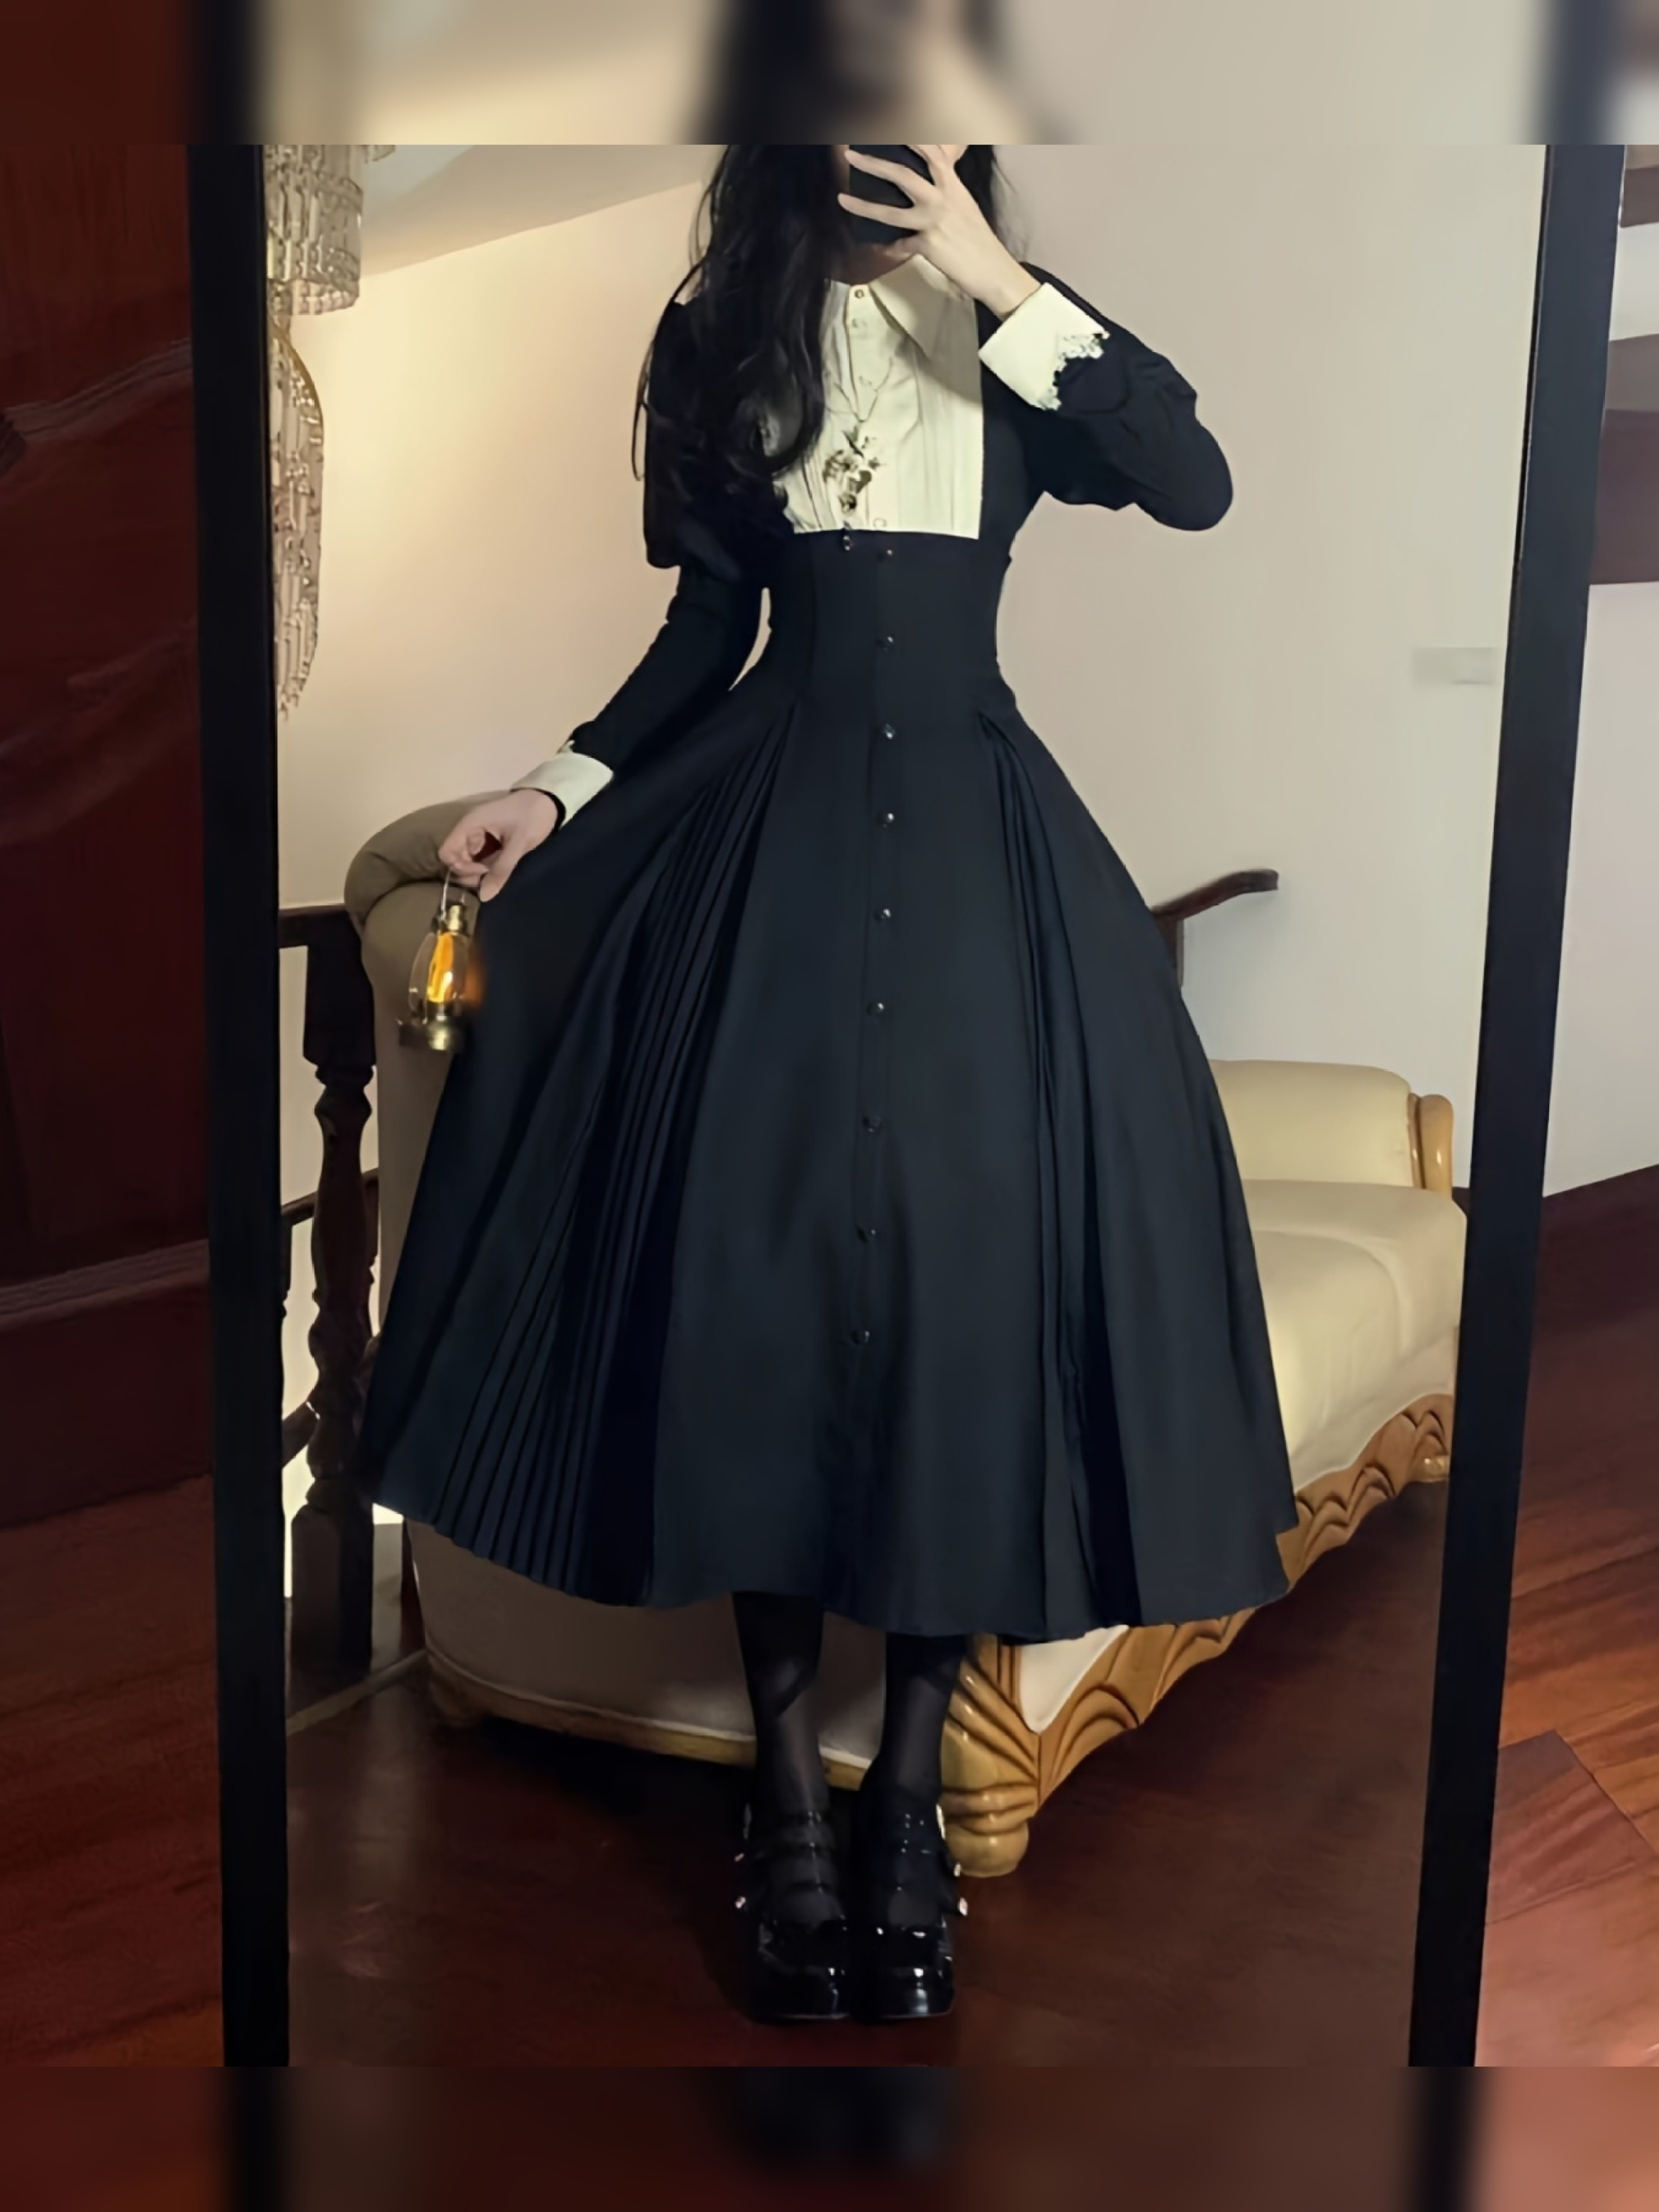 Save on Black Lolita Dresses Women's Clothing, Shoes & Jewelry at Our Store